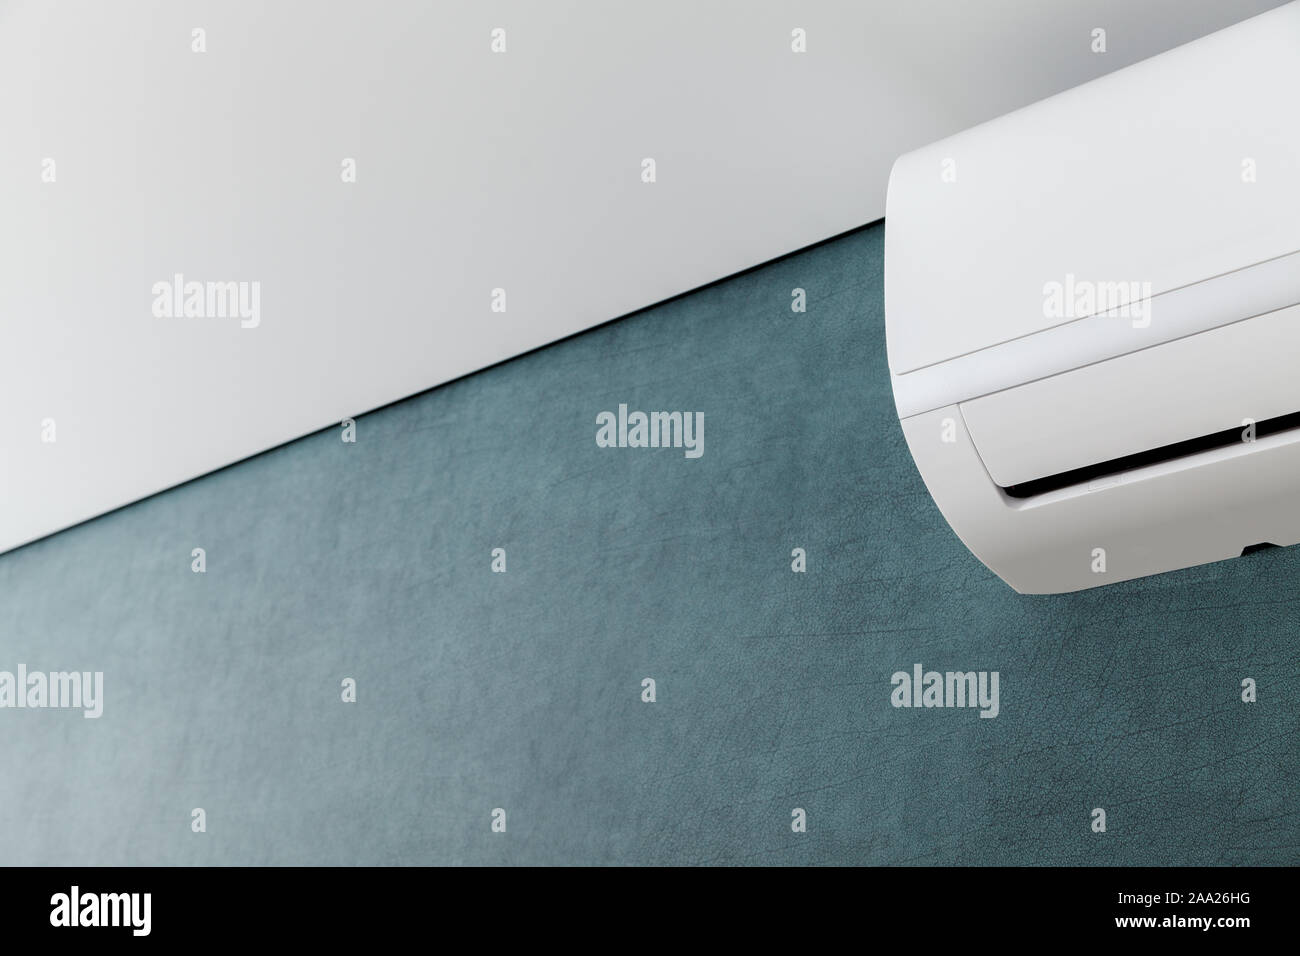 Air conditioner on wall, shallow dept of field Stock Photo